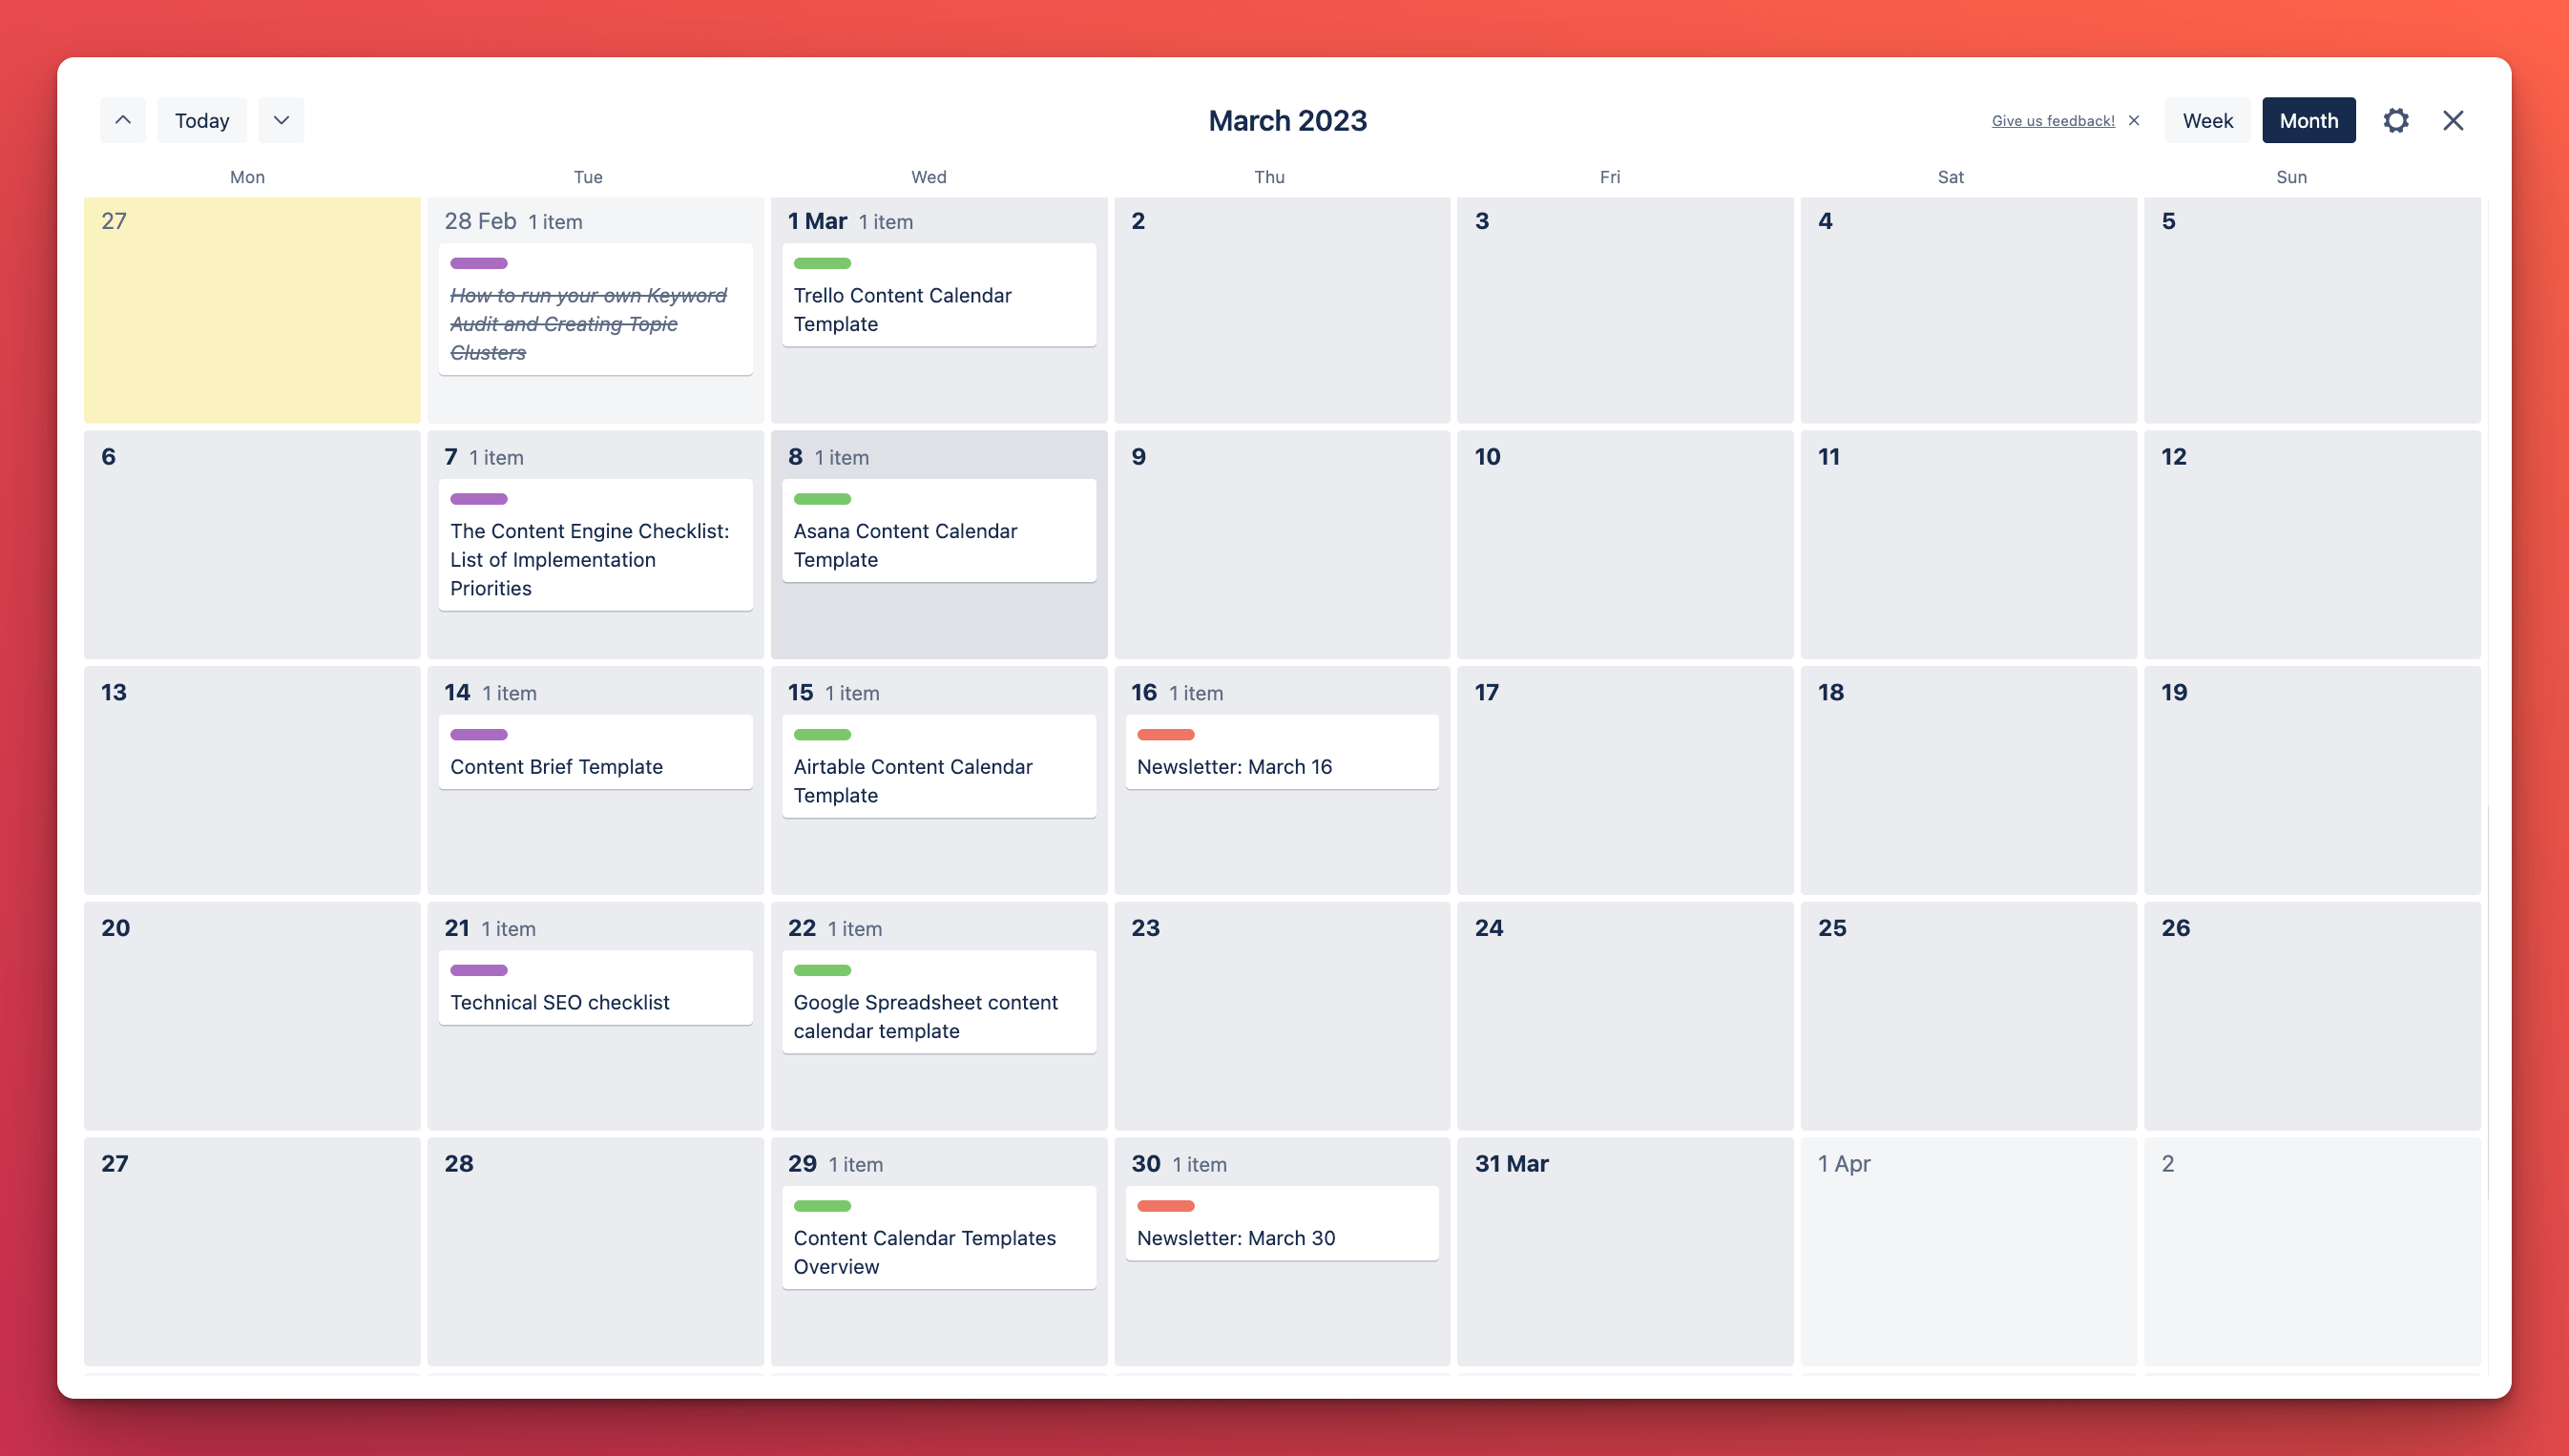 Calendar showing when articles, assets, or newsletter are being published.